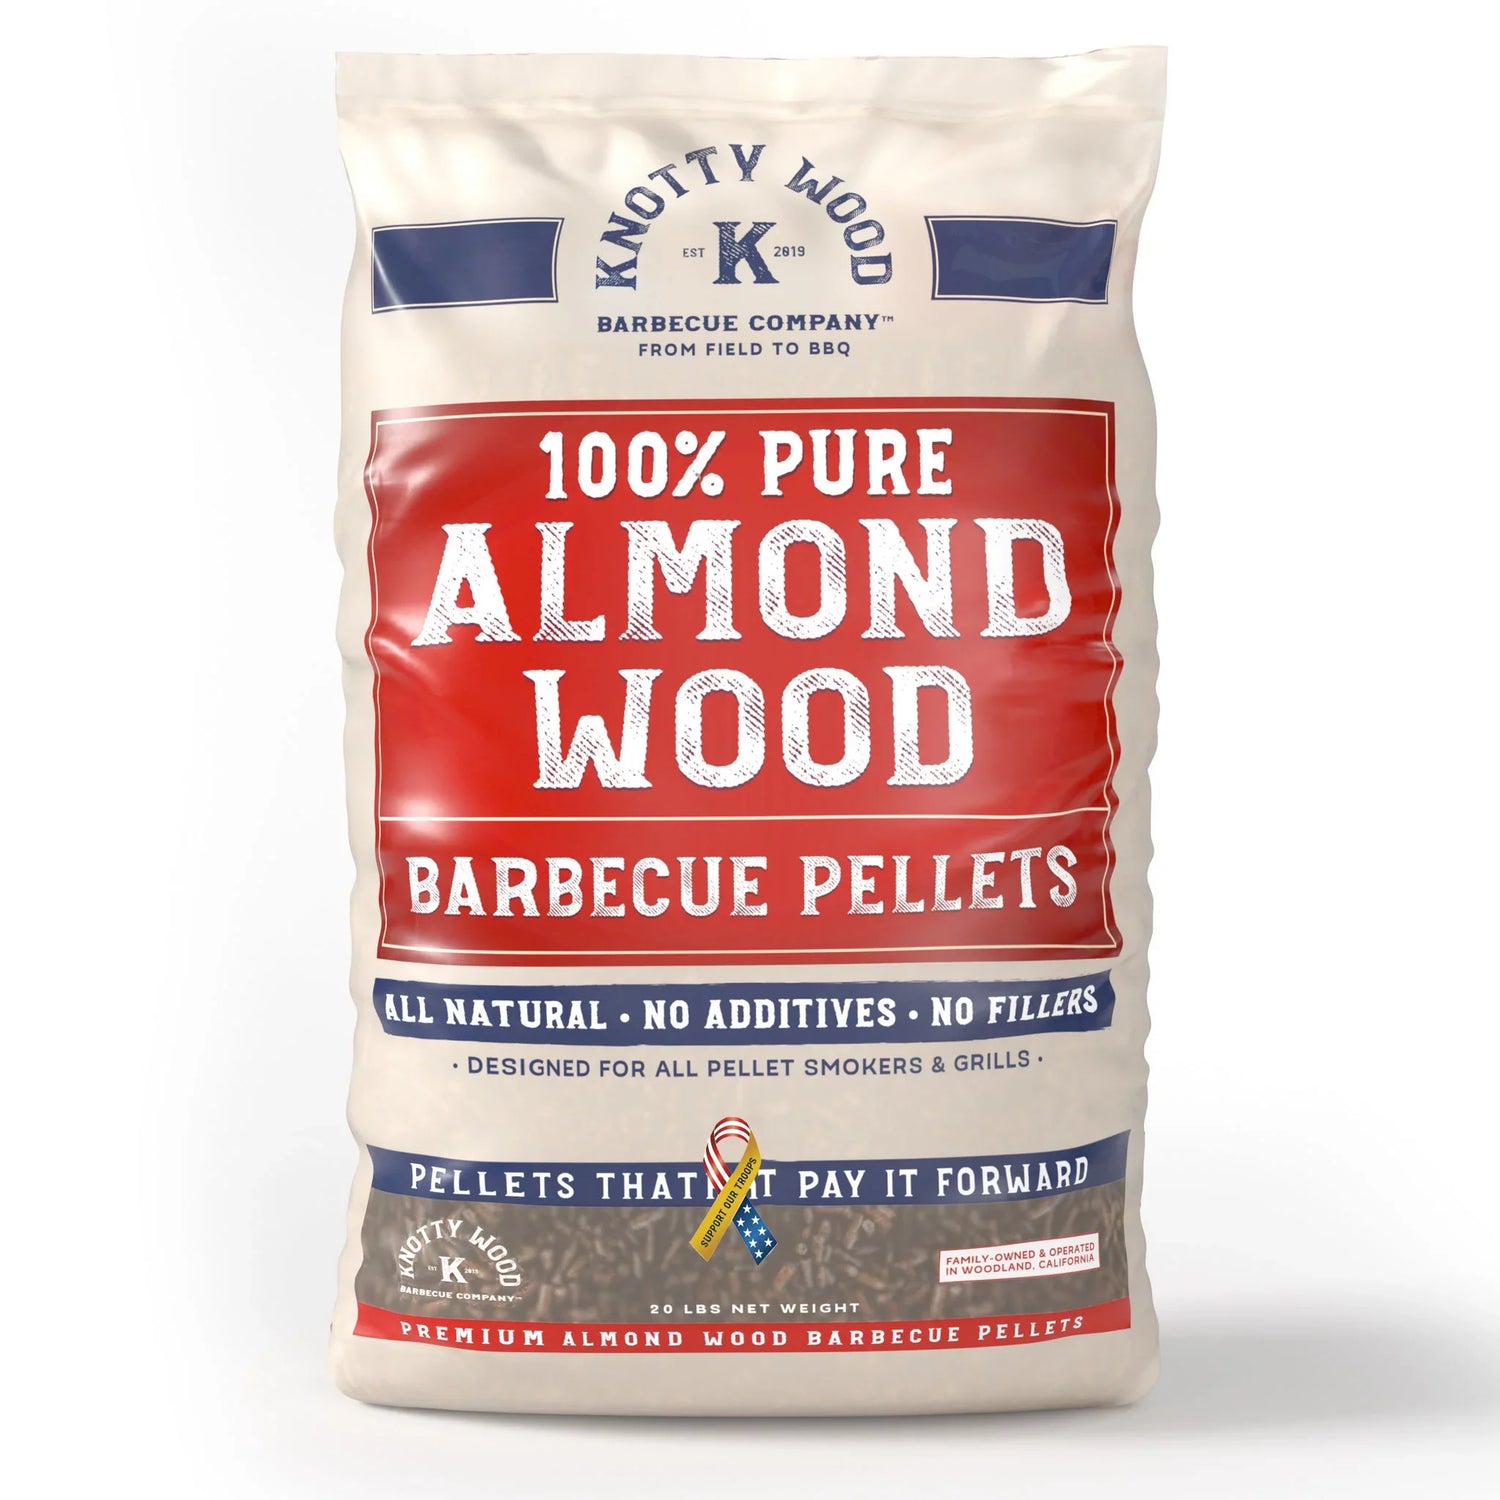 2 Pack: 100% Pure Almond Wood & Almond Cabernet Barbecue Pellets by Knotty Wood (2 x 20lb)